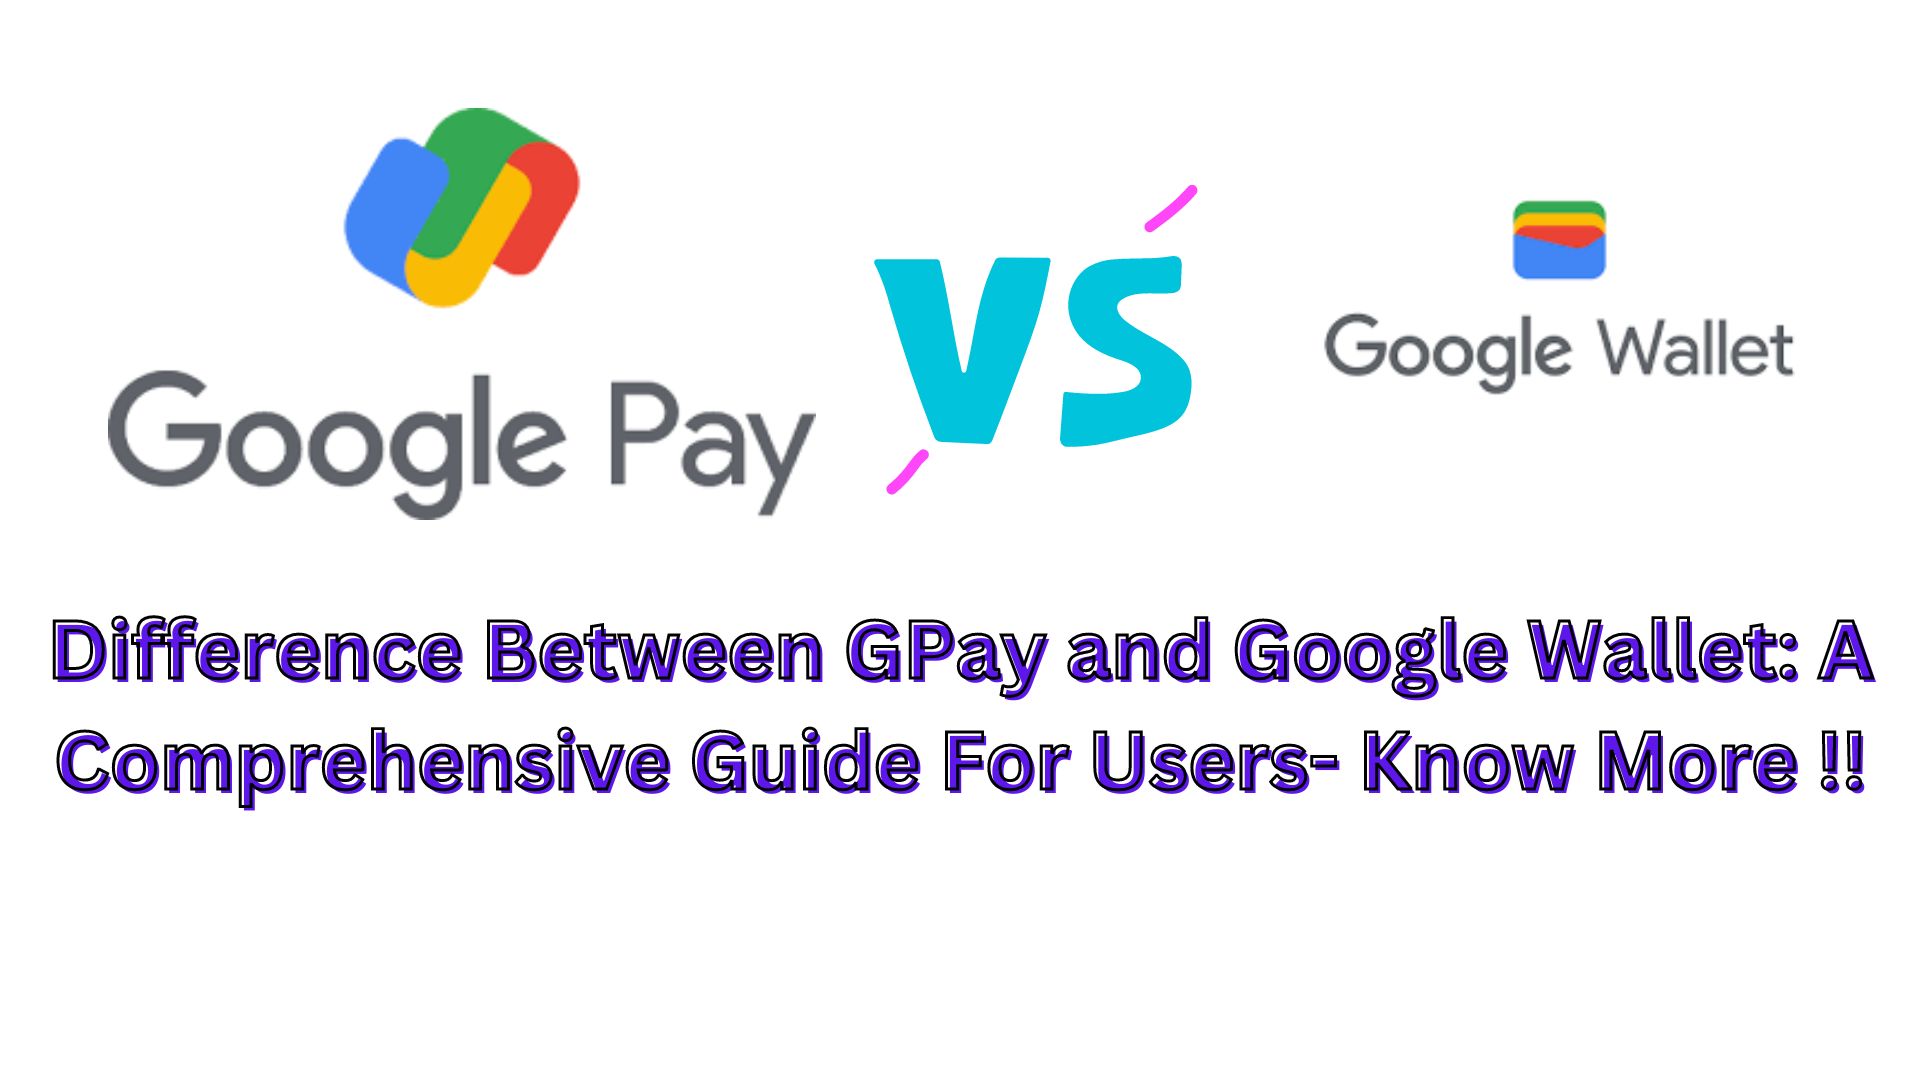 Difference Between GPay and Google Wallet: A Comprehensive Guide For Users- Know More !!